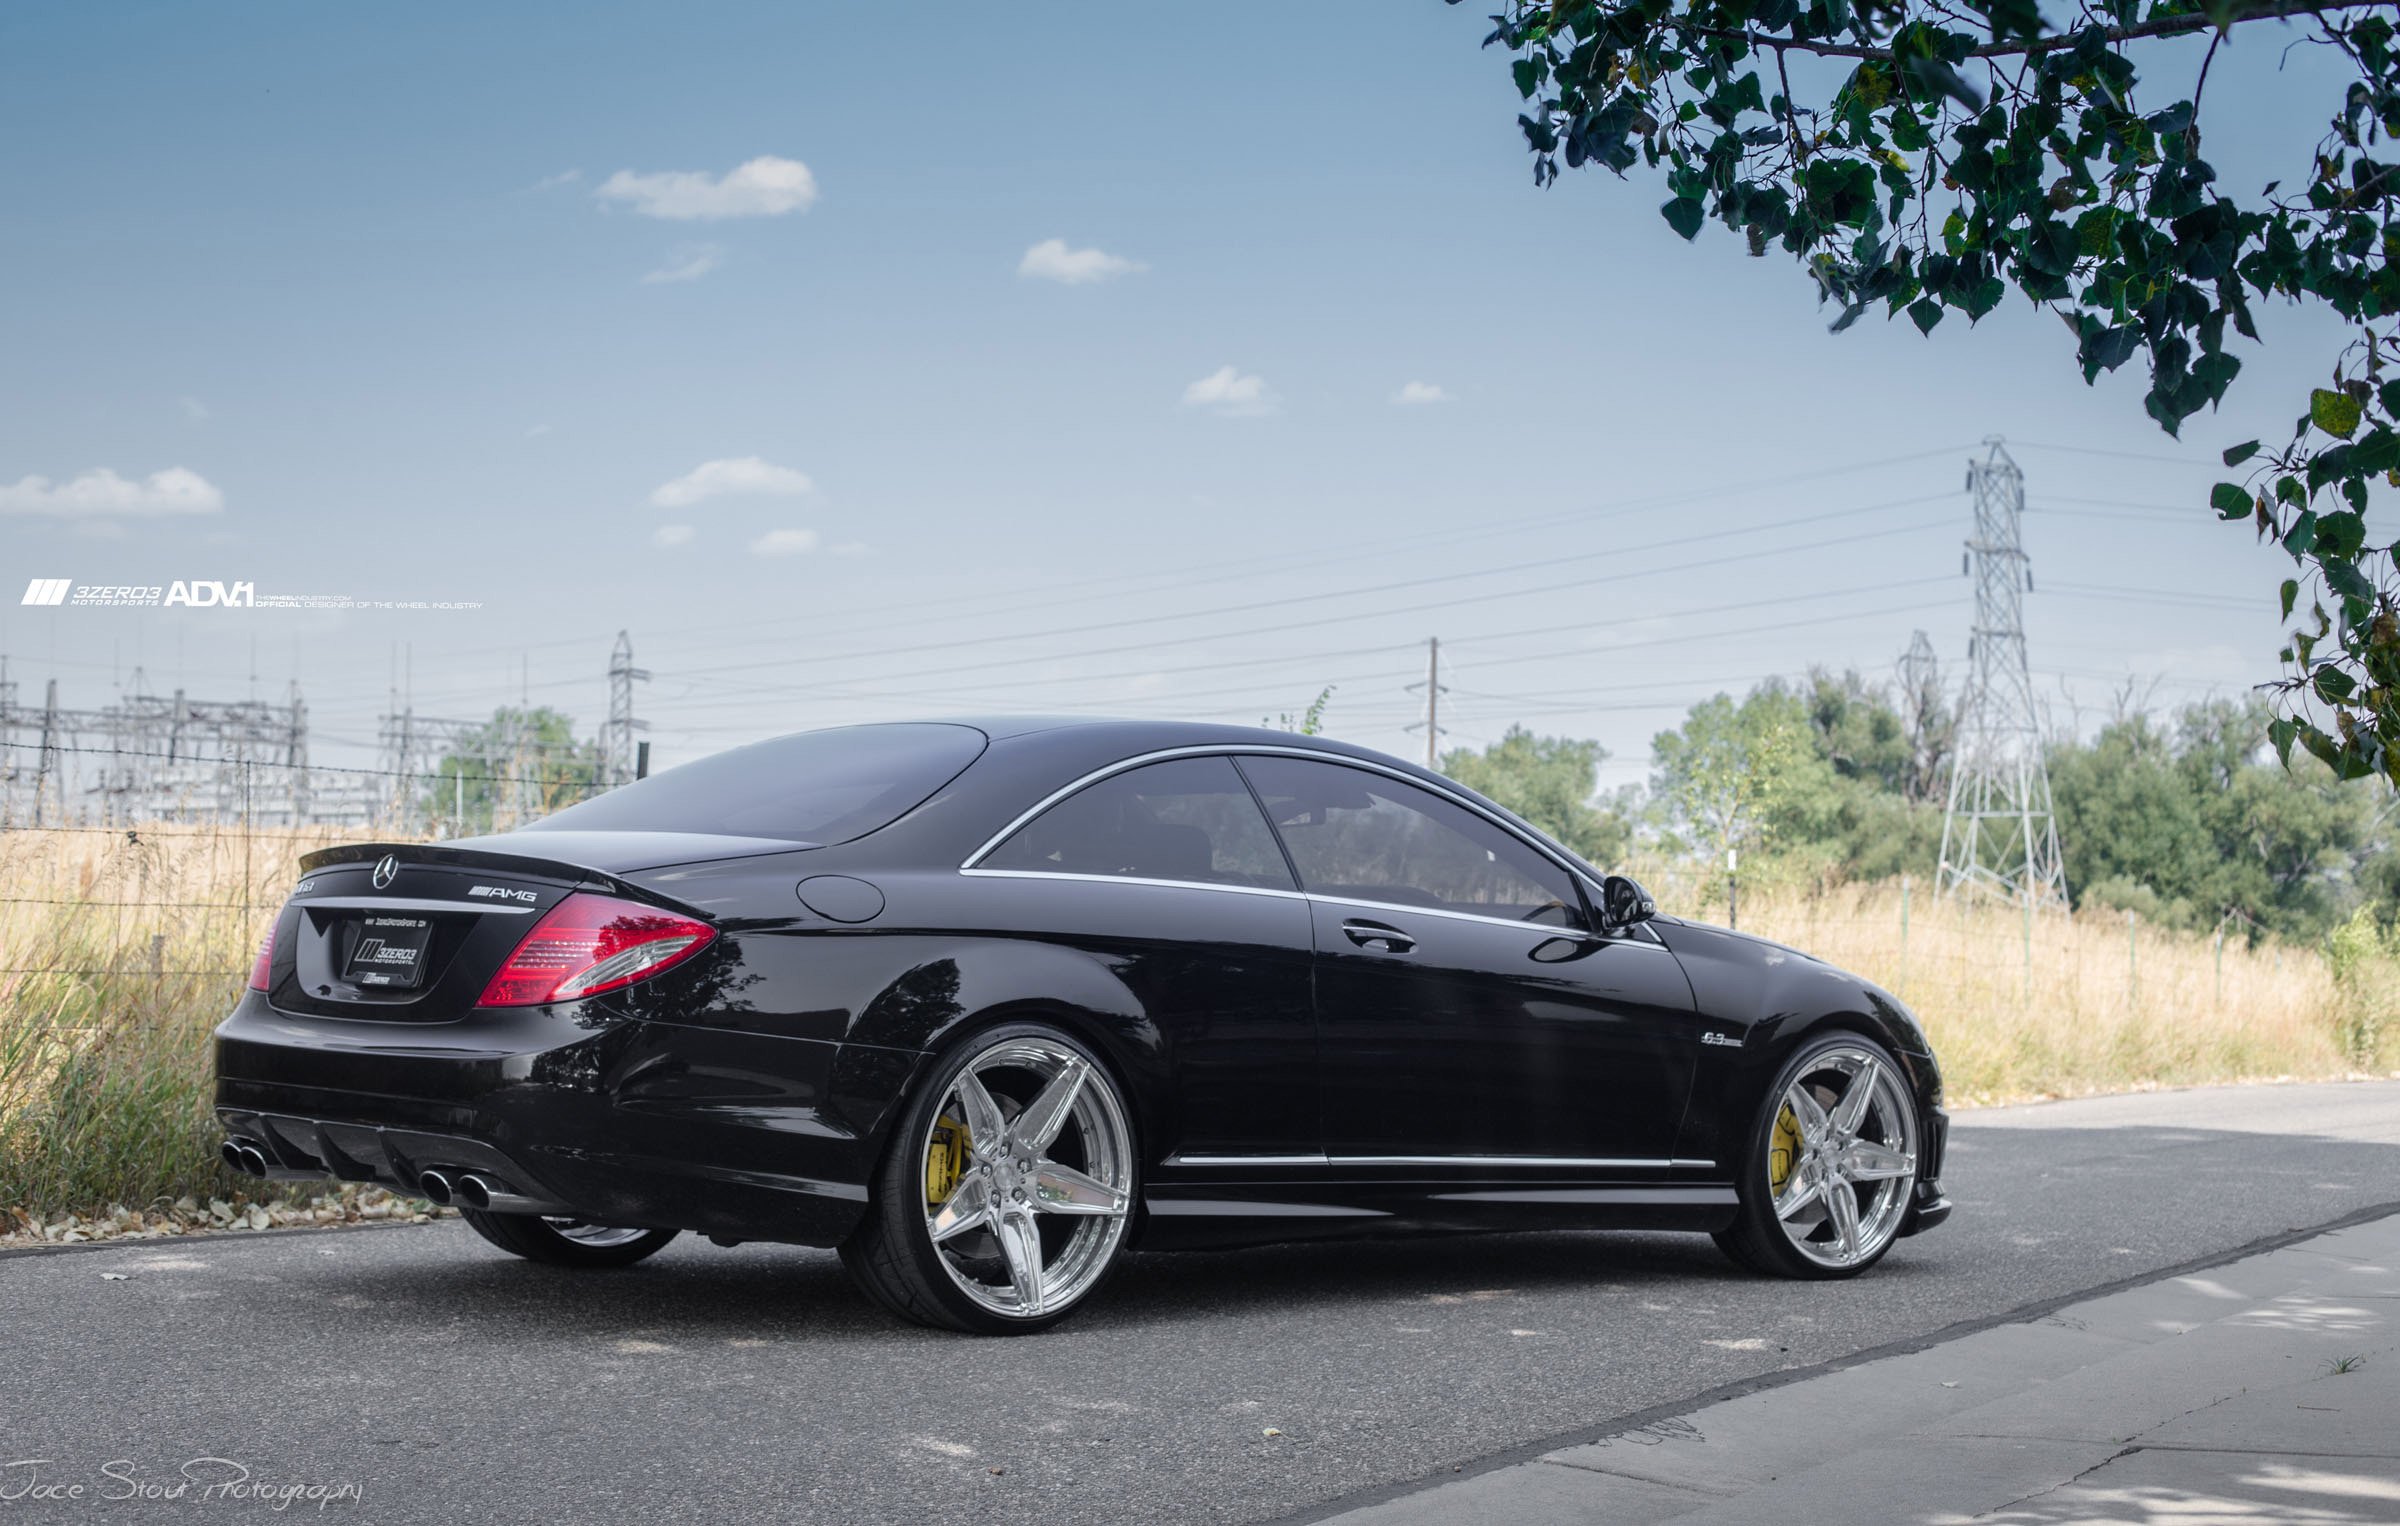 adv1, Wheels, Gallery, Mercedes, Cl63, Amg, Cars, Coupe Wallpaper